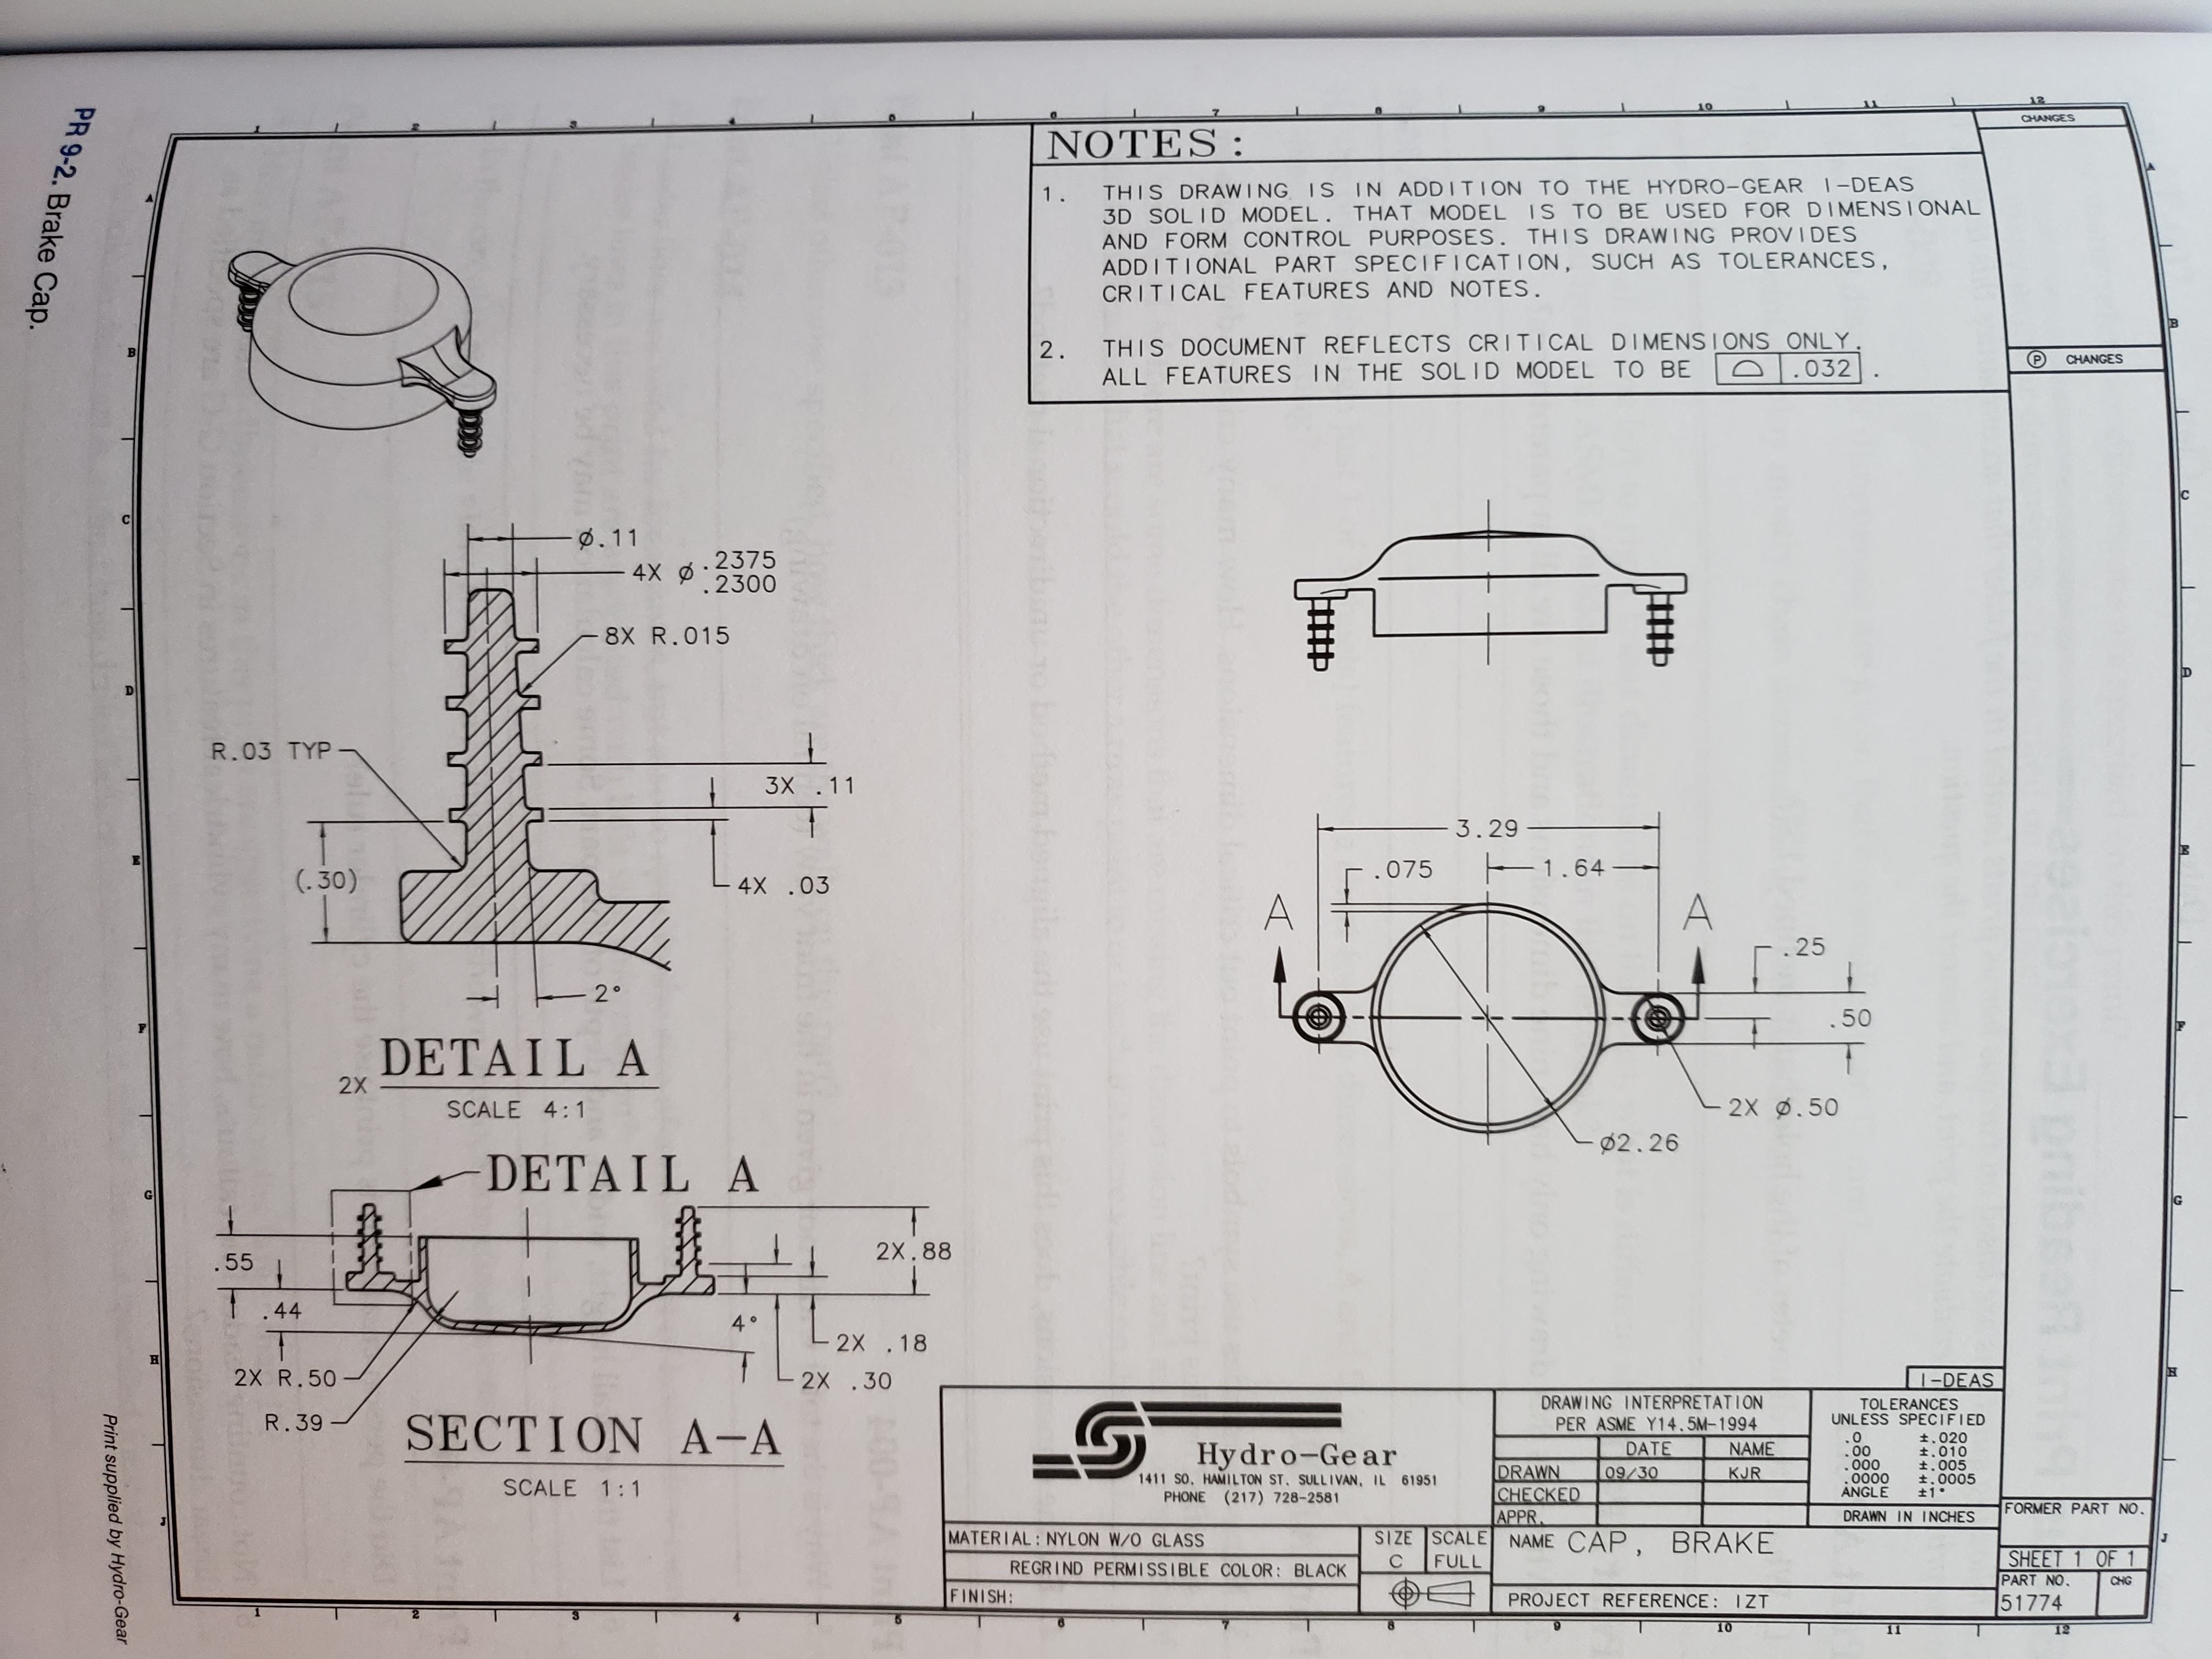 12
CHANGES
ΝΟΤΕS :
THIS DRAWING IS IN ADDITION TO THE HYDRO-GEAR 1-DEAS
3D SOLID MODEL. THAT MODEL IS TO BE USED FOR DIMENS IONAL
AND FORM CONTROL PURPOSES. THIS DRAWING PROVI DES
ADD I TIONAL PART SPEC I FI CATION, SUCH AS TOLERANCES,
CRITICAL FEATURES AND NOTES.
1.
THIS DOCUMENT REFLECTS CRITICAL DIMENSIONS ONLY.
D032
2.
CHANGES
ALL FEATURES IN THE SOL ID MODEL TO BE
. 11
- 4X .2375
.2300
8X R.015
R.03 TYP
3X .11
3.29
1.64-
A
.075
(.30)
4X .03
.25
- 2°
.50
DETAIL A
2X
2X .50
SCALE 4:1
2.26
- DETA IL
A
2X.88
.55
44
4 0
2X .18
H
2X R. 50
2X .30
I-DEAS
DRAWING INTERPRETATION
PER ASME Y14.5M-1994
TOLERANCES
UNLESS SPECIFIED
R. 39
SECTION A-A
0
.00
000
0000
ANGLE
t.020
t.010
t.005
t.0005
t1 °
Hy dro-Ge ar
DATE
NAME
DRAWN
CHECKED
APPR
SIZE SCALE NAME CAP
FULL
09/30
KJR
1411 S0. HAMILTON ST. SULLIVAN, IL 61951
PHONE (217) 728-2581
SCALE 1:1
FORMER PART NO.
DRAWN IN INCHES
MATERIAL: NYLON W/O GLASS
BRAKE
SHEET 1 OF 1
PART NO.
51774
C
REGRIND PERMISSIBLE COLOR: BLACK
CHG
FINISH:
PROJECT REFERENCE: IZT
10
12
Print supplied by Hydro-Gear
PR 9-2. Brake Cap.
